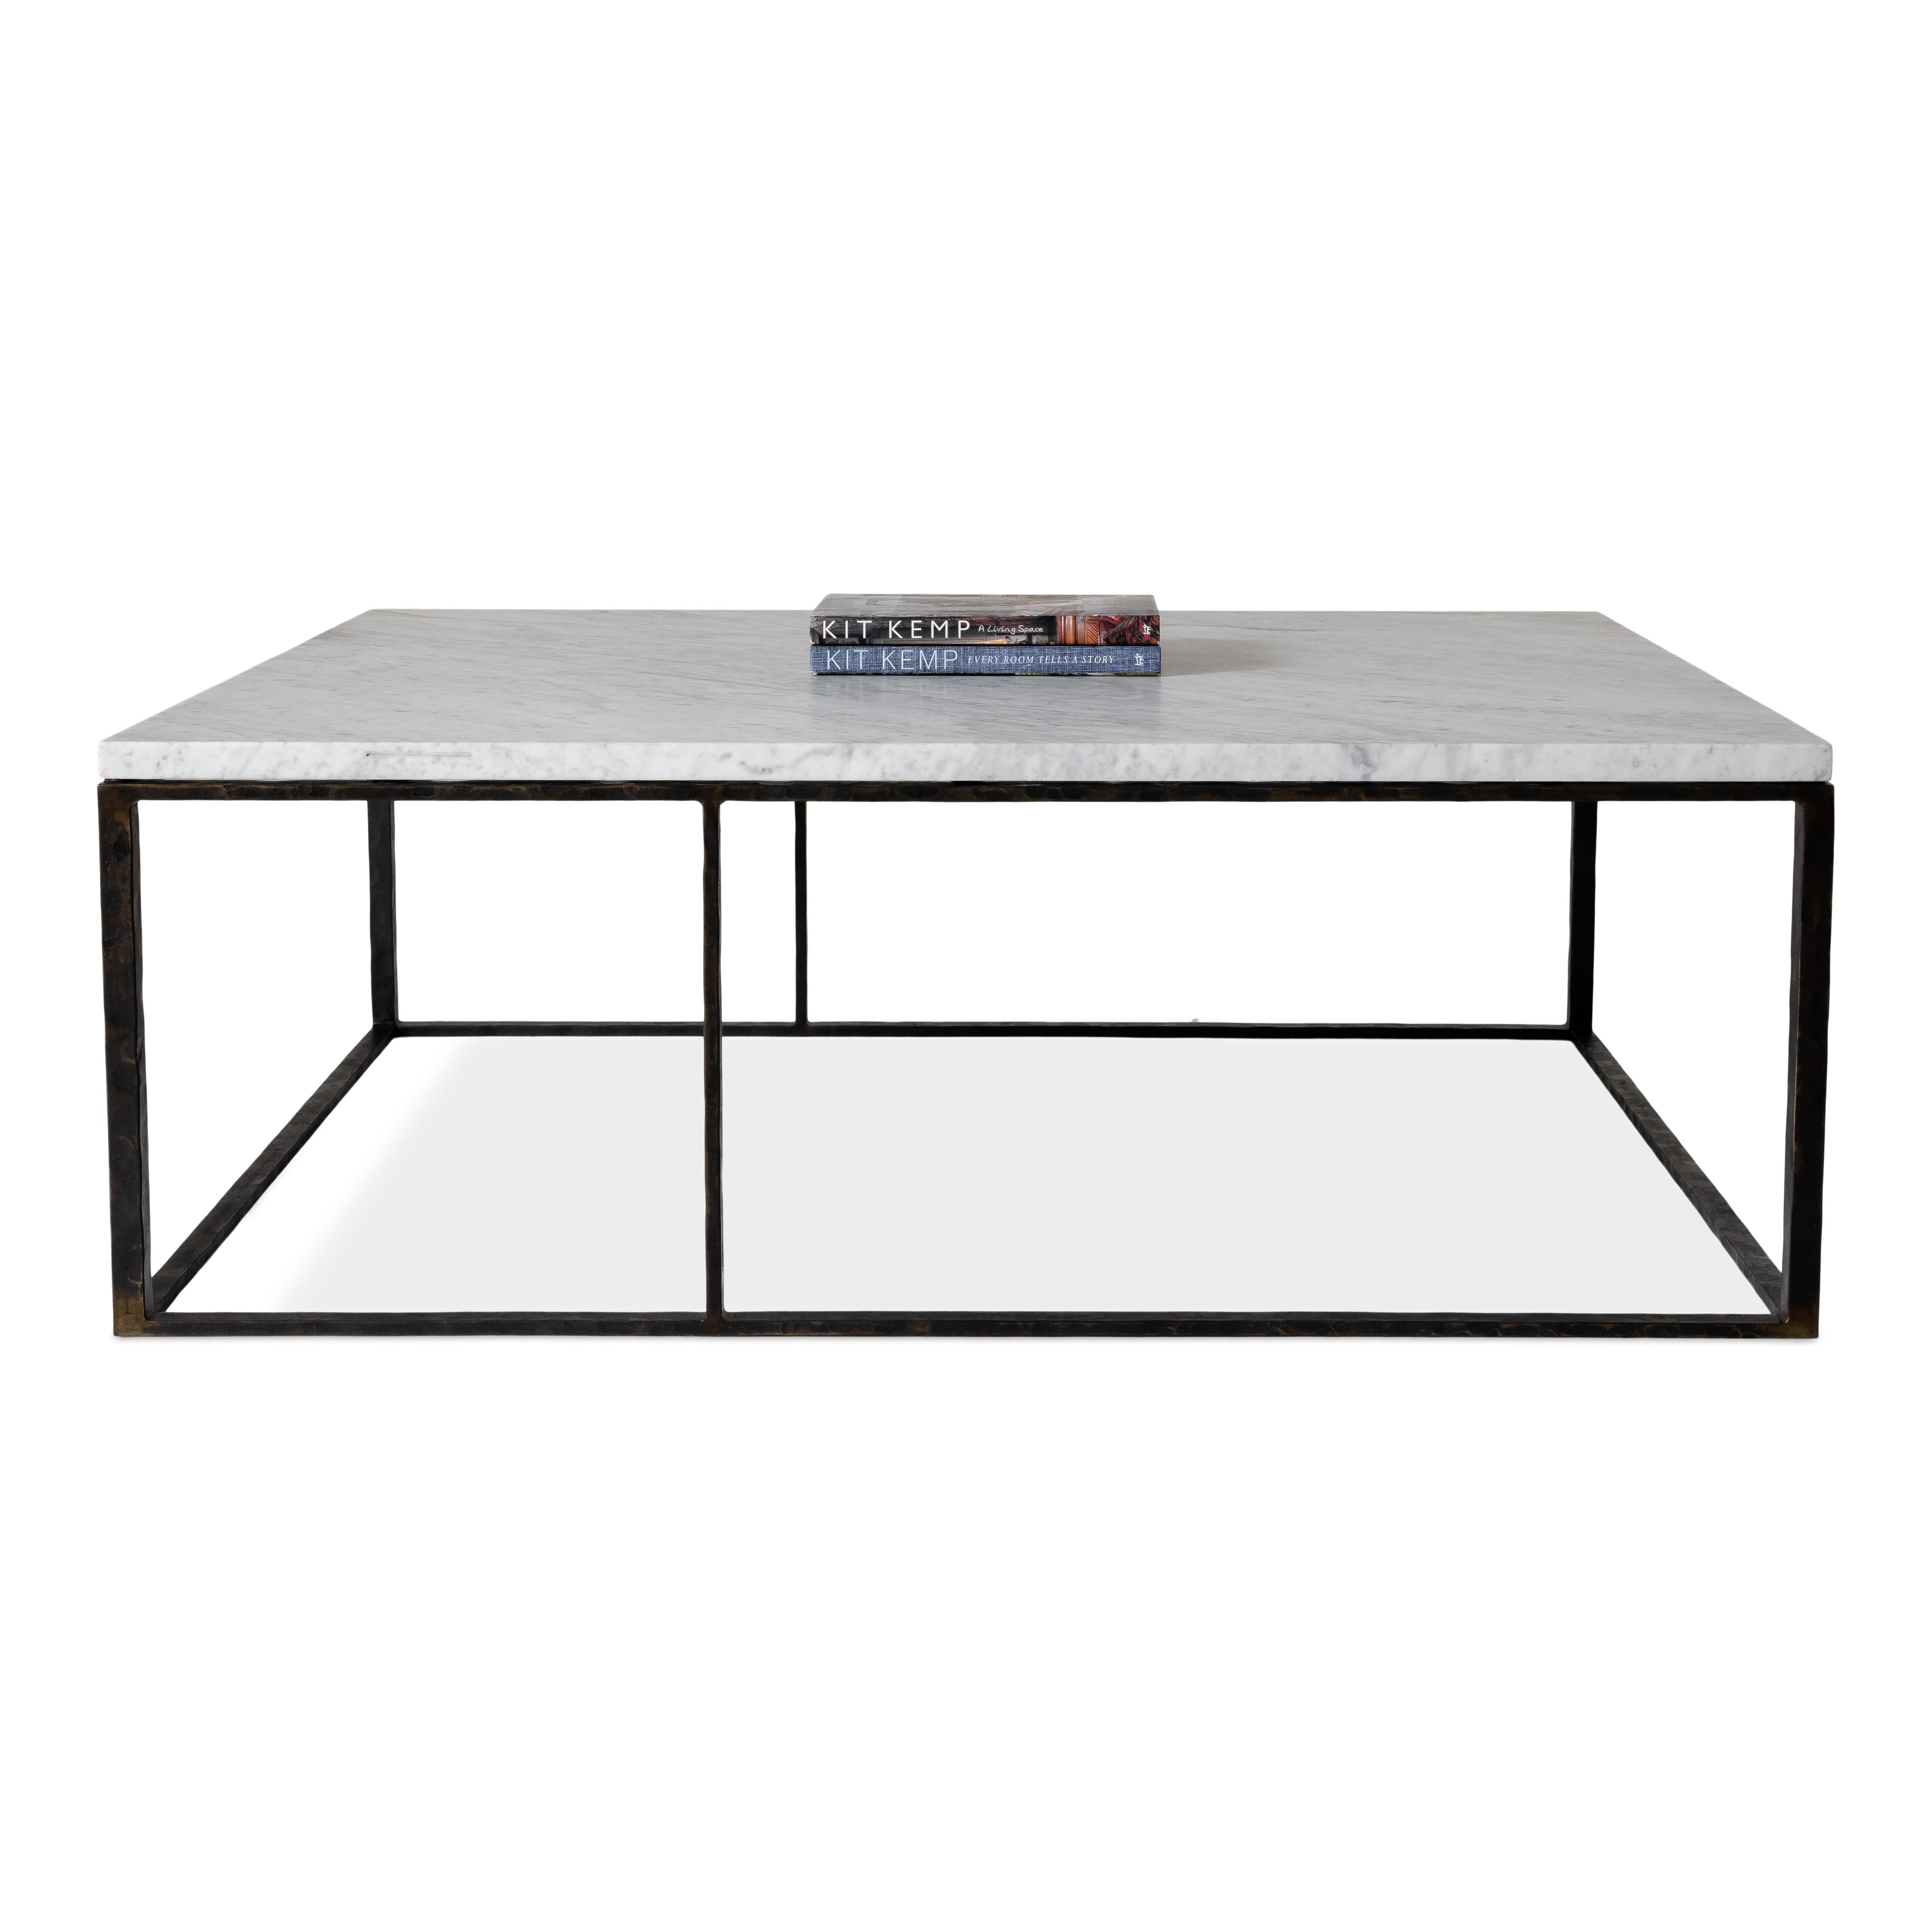 Minimalist coffee table with honed carrara marble with textured metal base.

Designed by Brendan Bass for the Vision and Design Collection, by using high quality materials and textures. All materials are sourced from local vendors throughout the